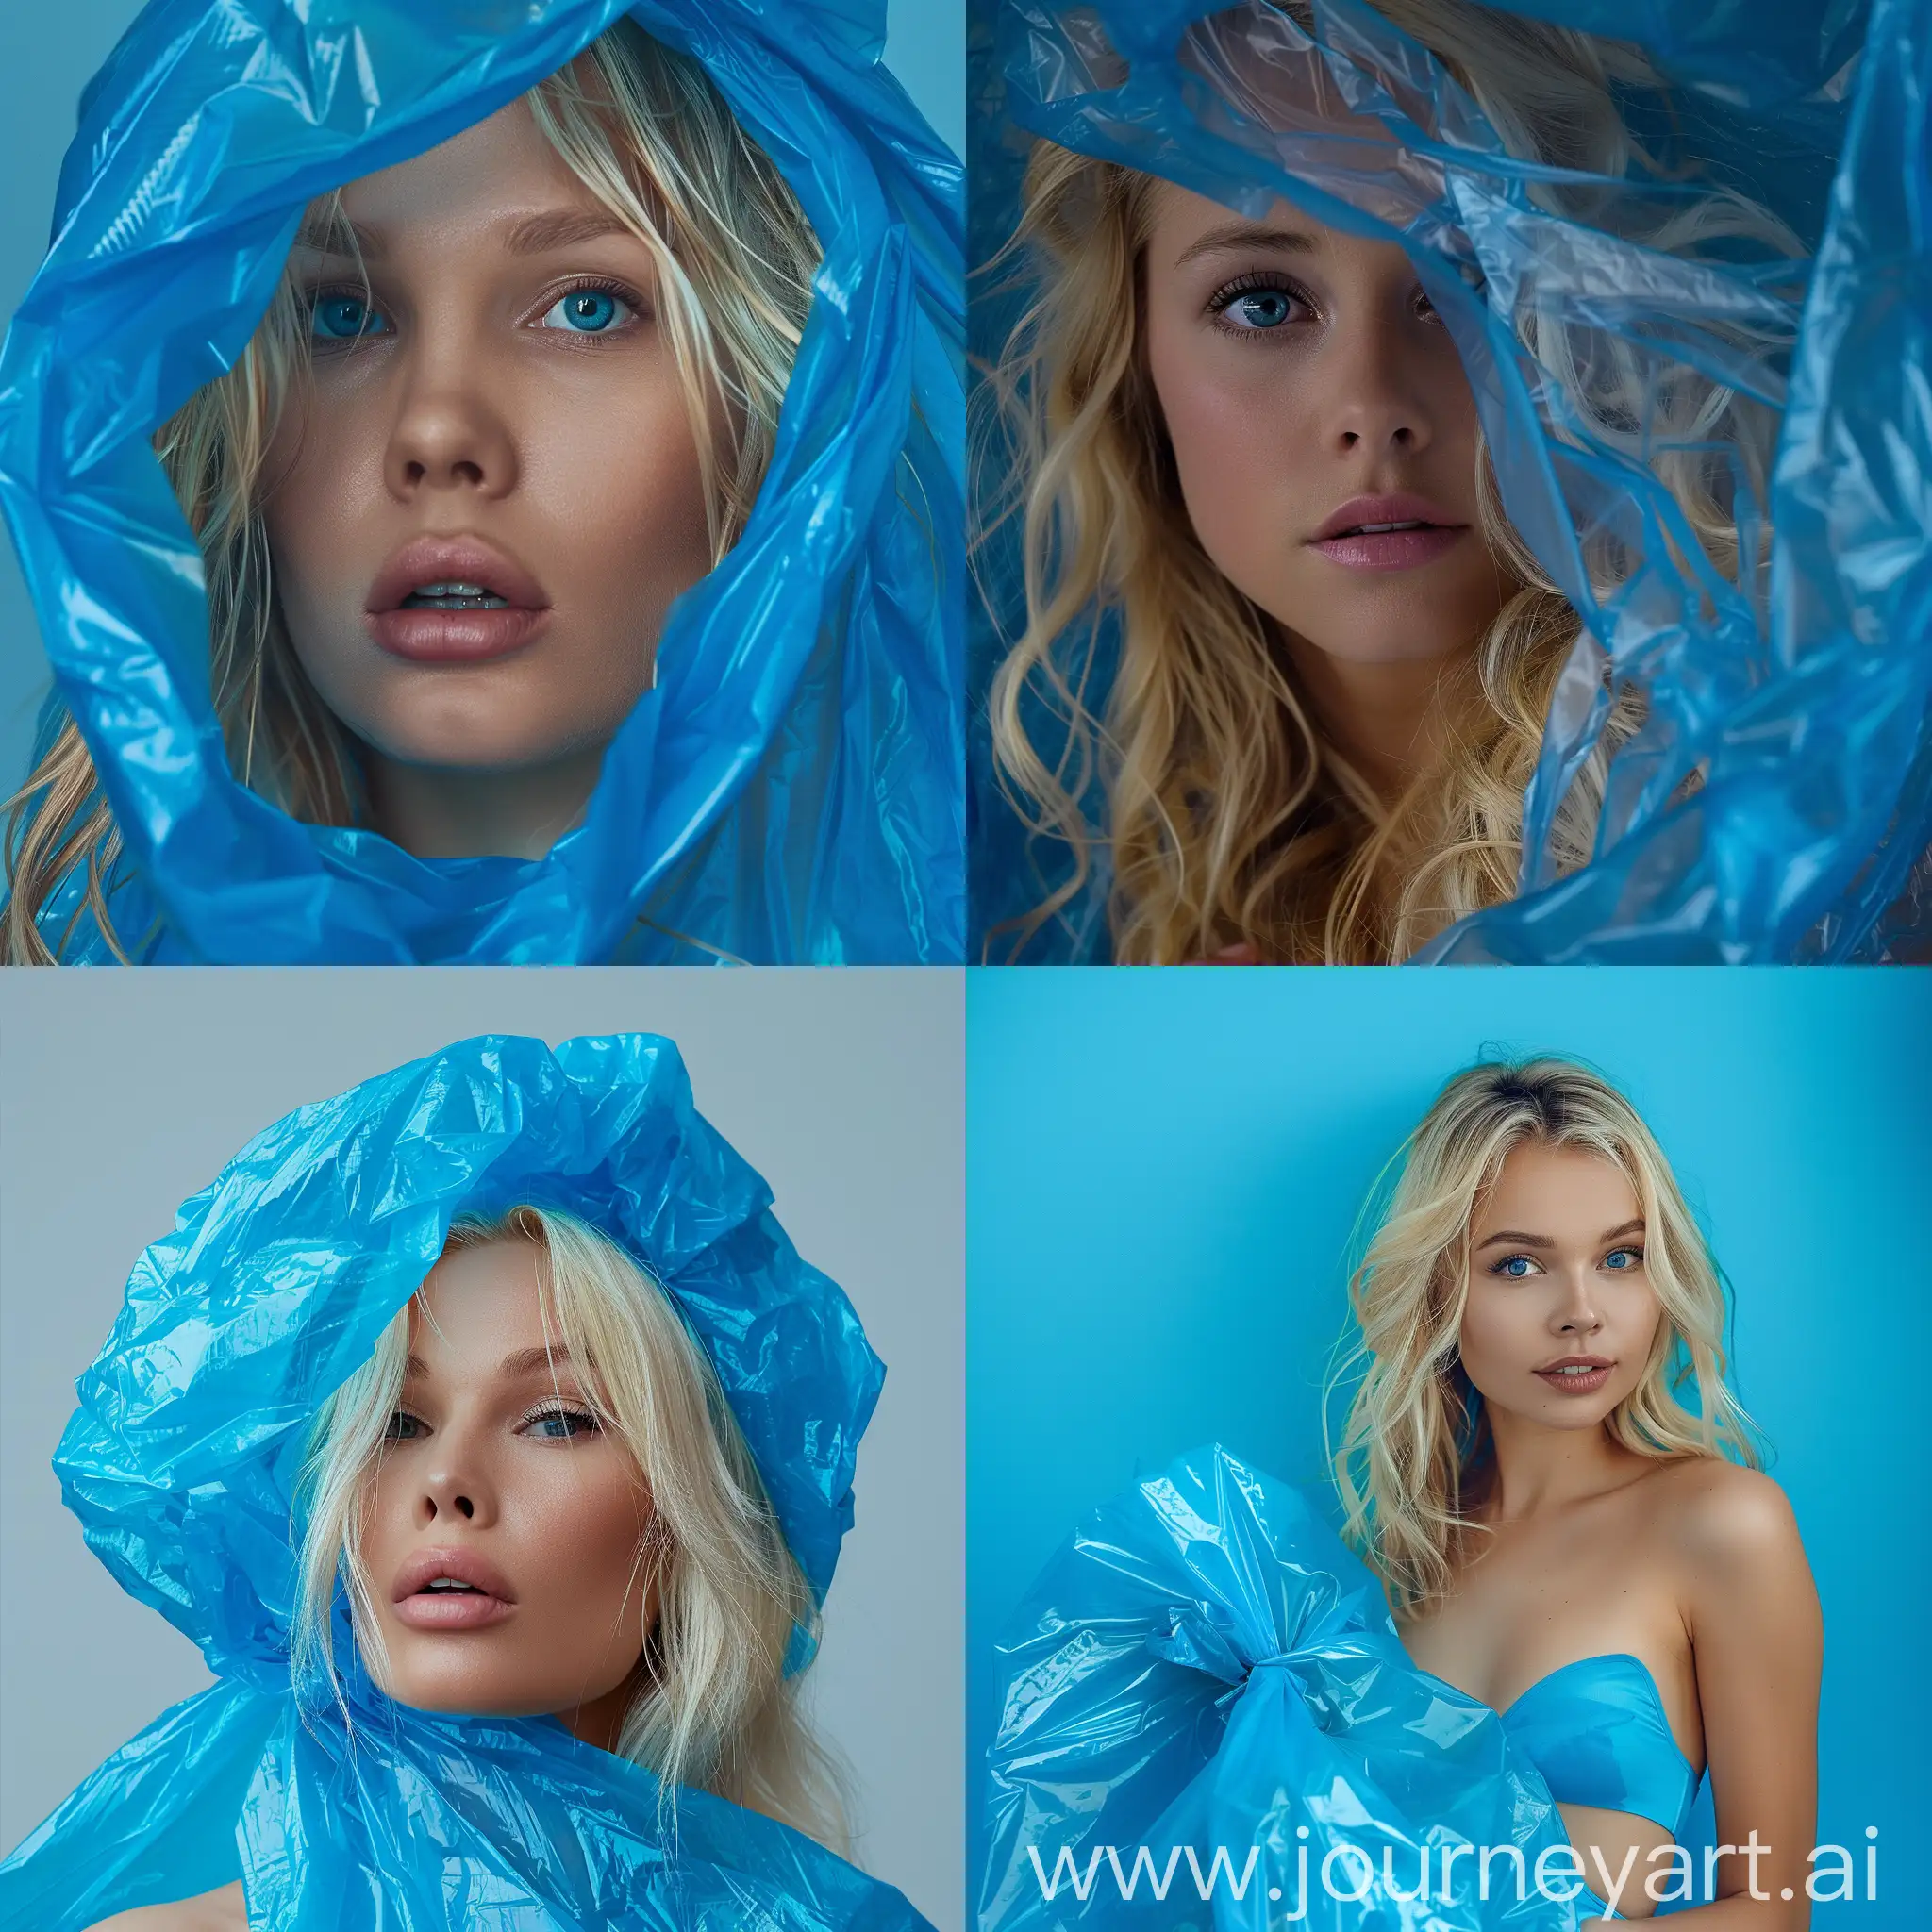 Stunning-Blonde-Woman-Fashioned-in-Blue-Plastic-Garbage-Bag